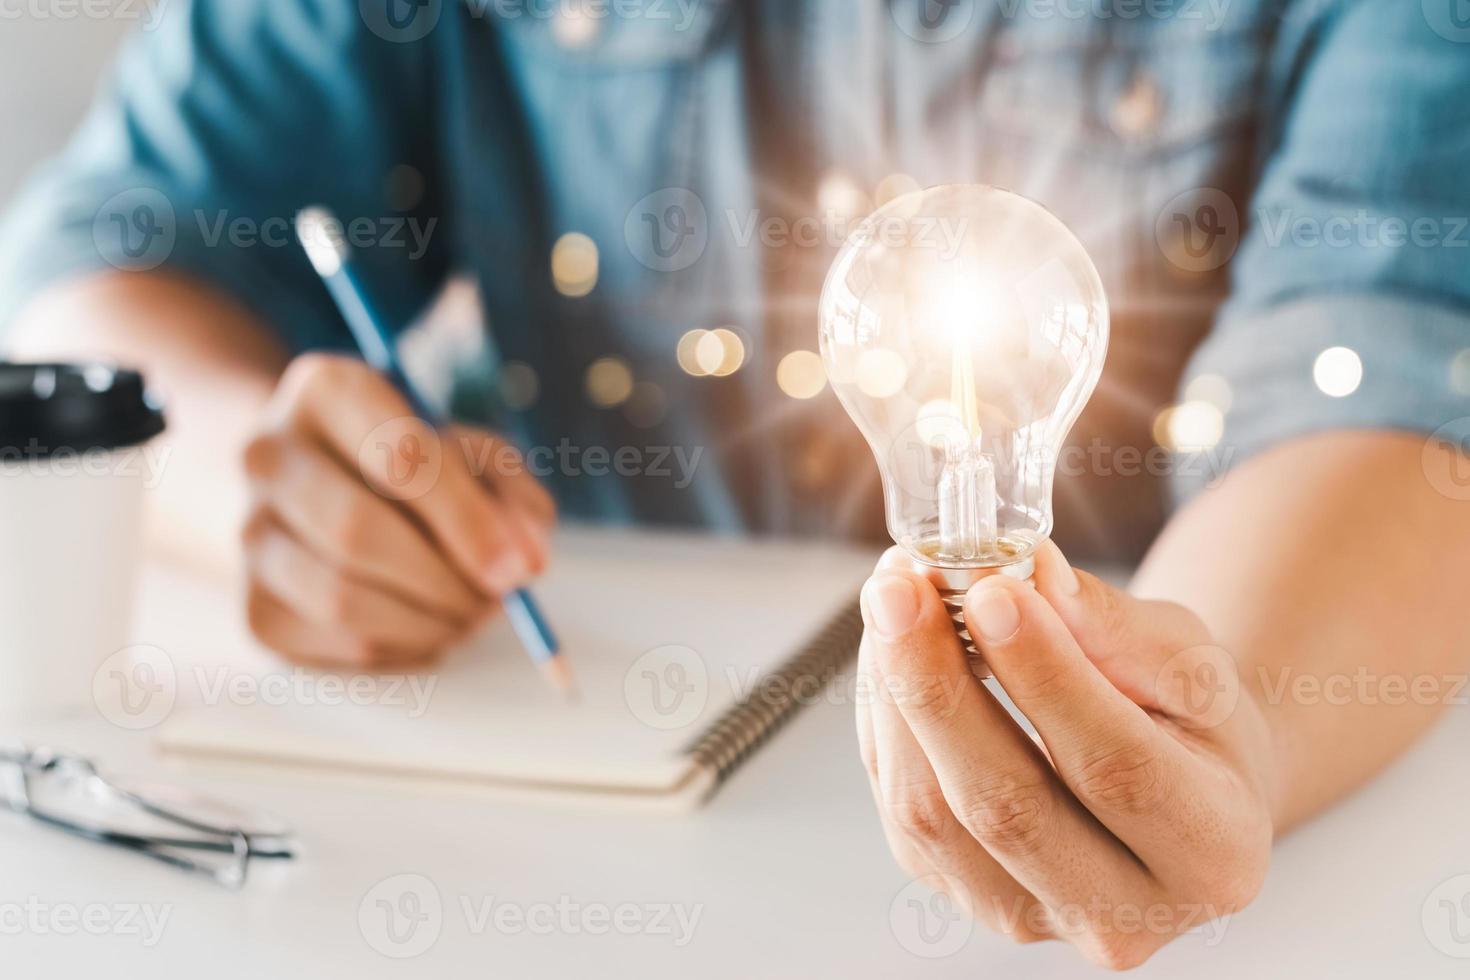 Innovation through ideas and inspiration ideas. Human hand holding light bulb to illuminate, idea of creativity and inspiration concept of sustainable business development. photo